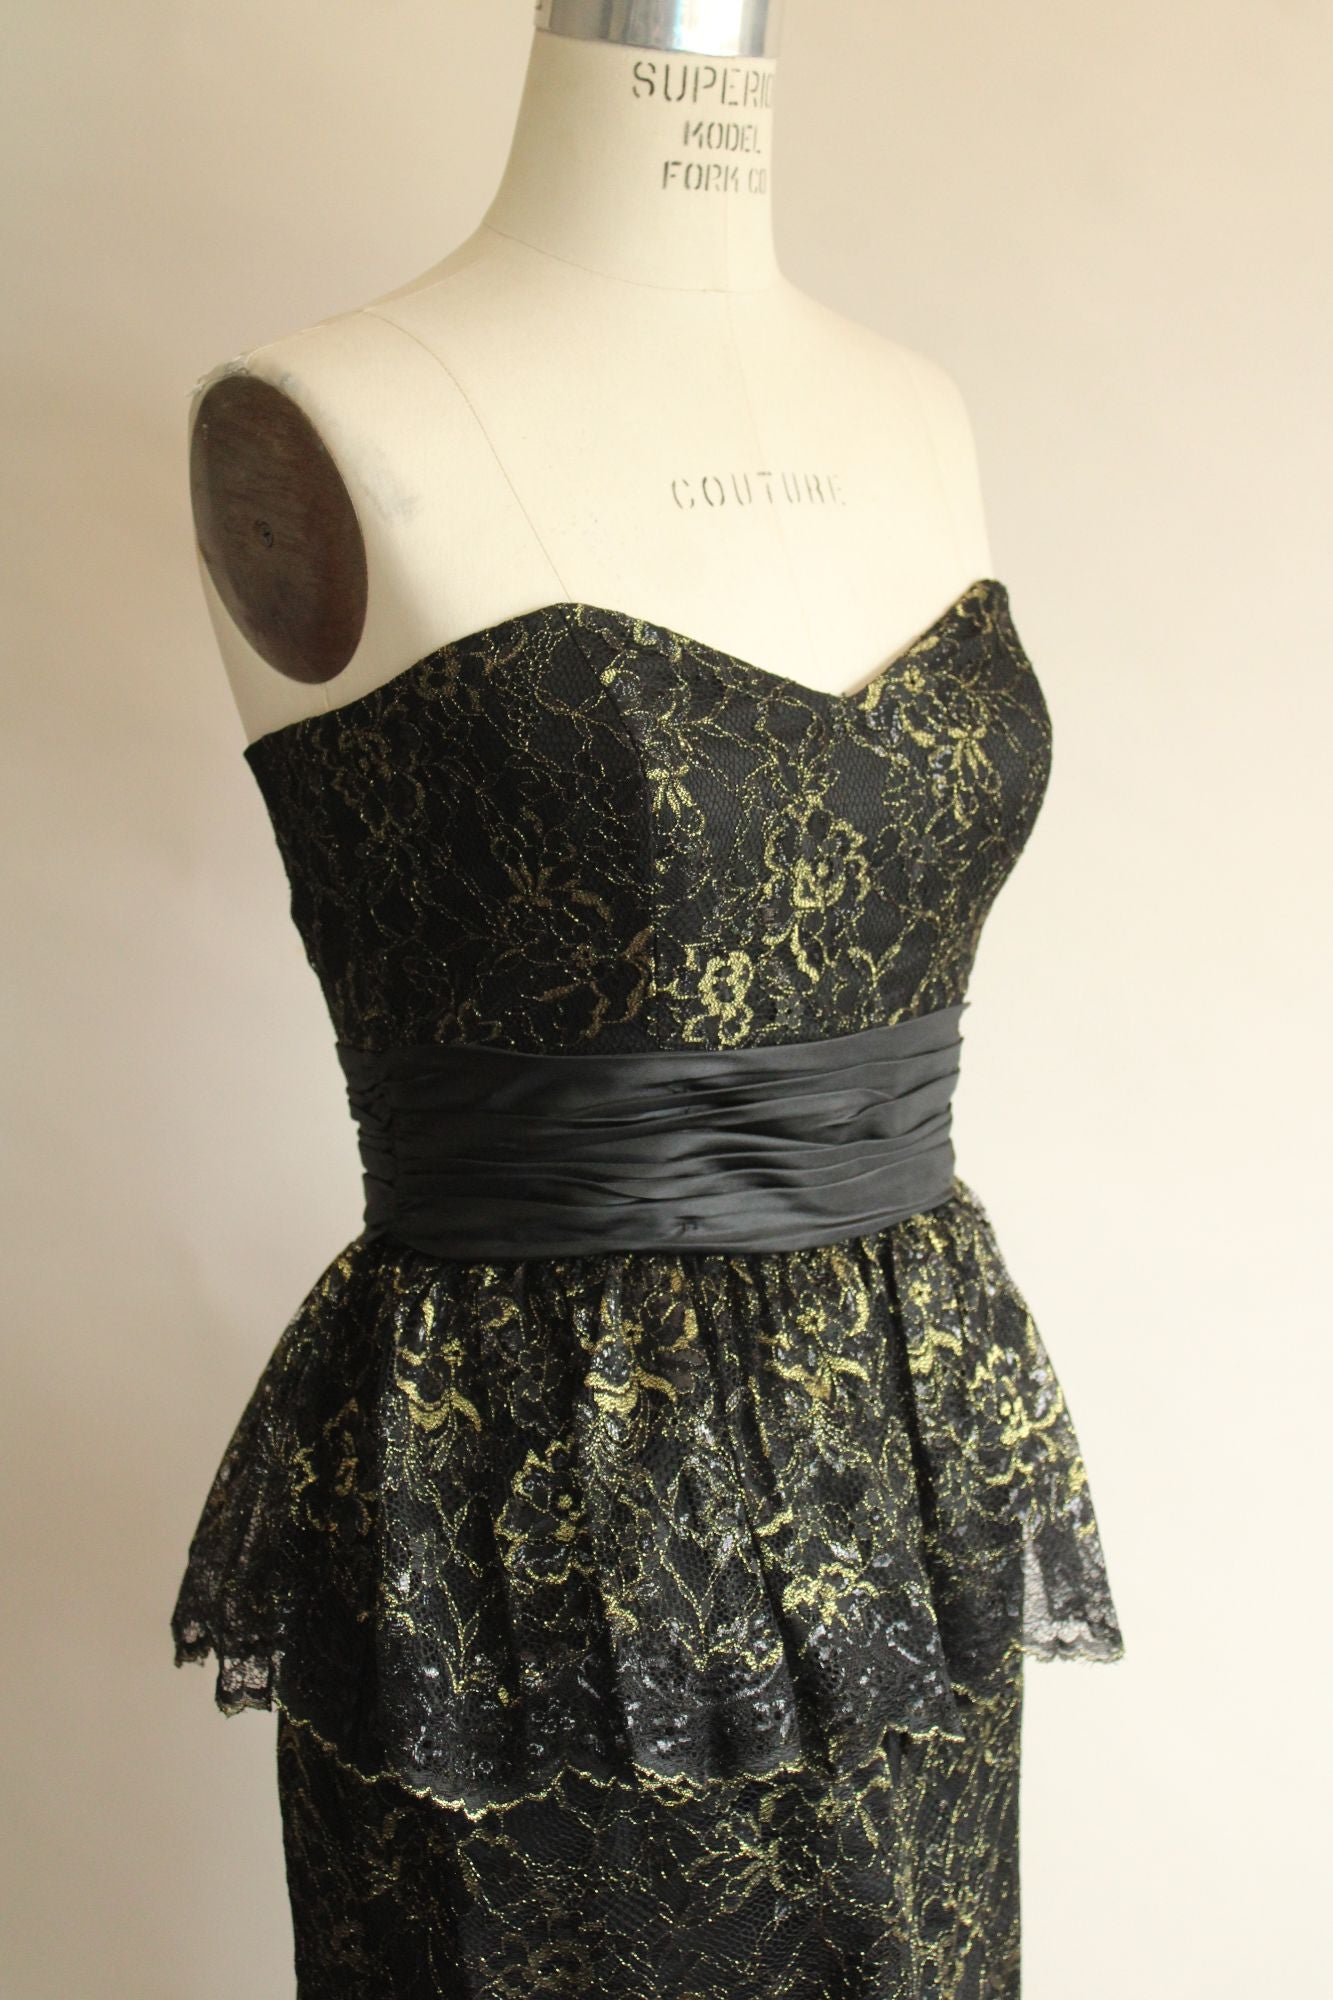 Betsey Johnson Dress, New, Size 6 Black and Gold Lace